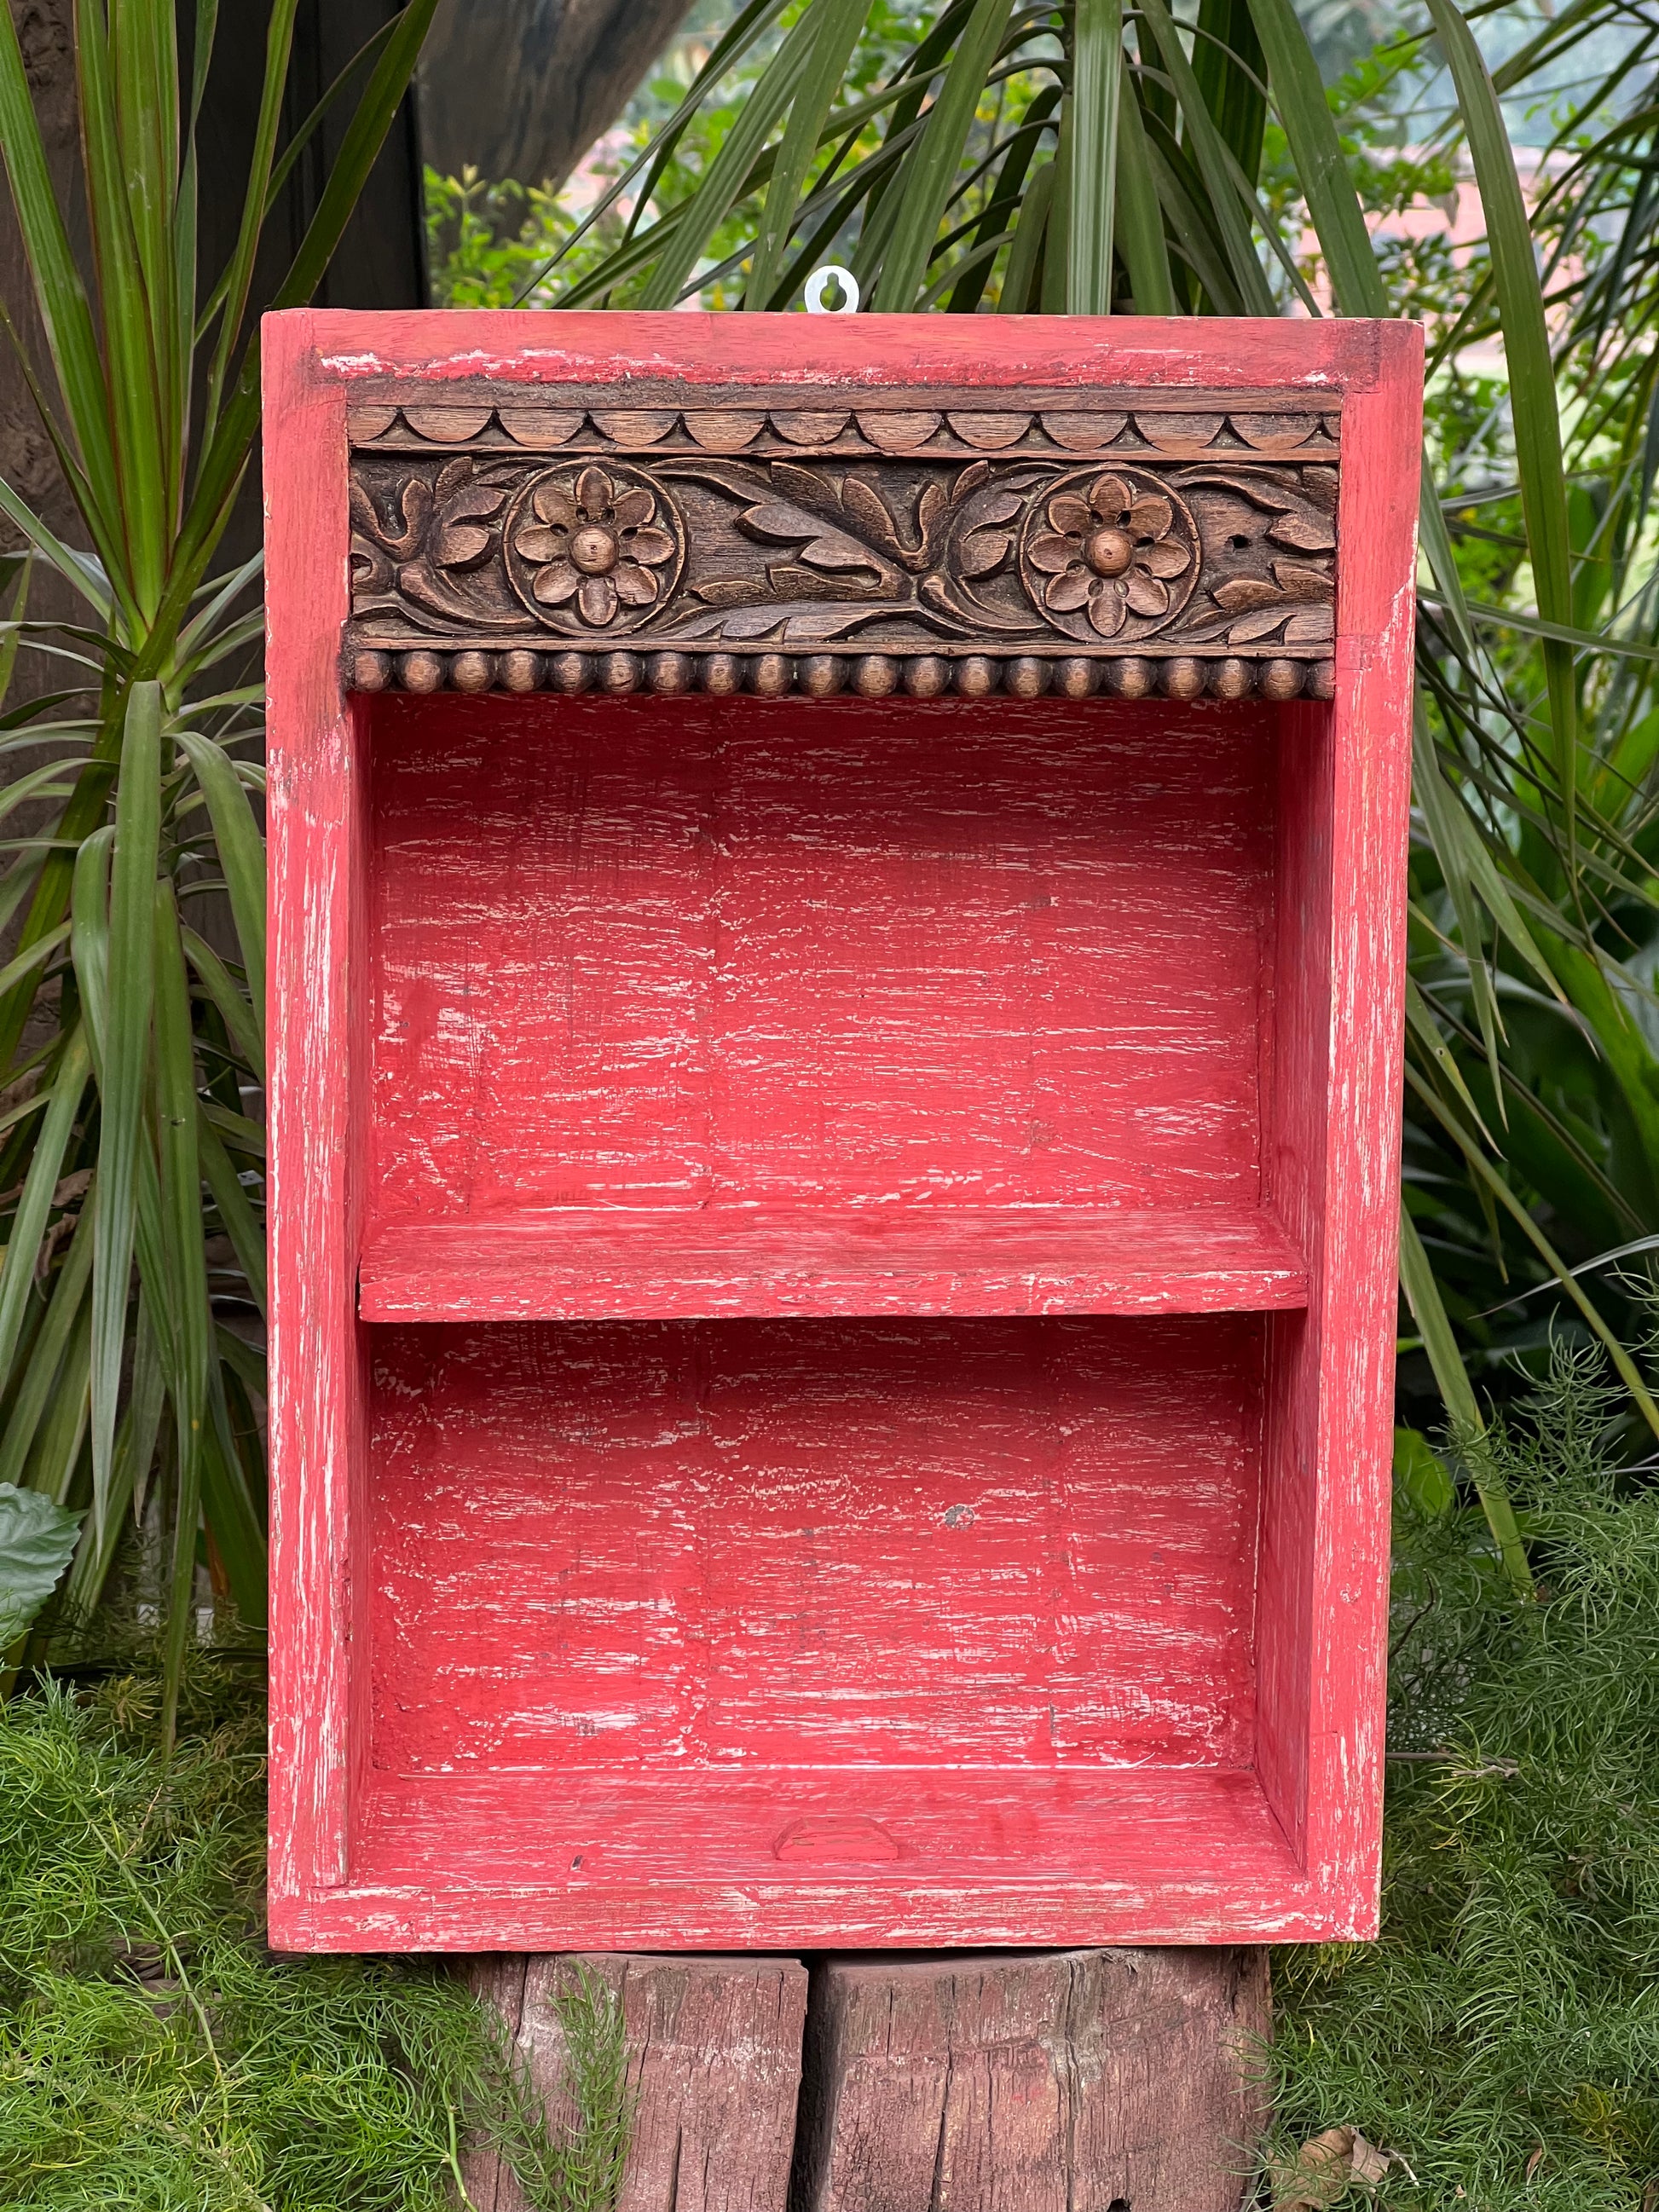 Image of Elegant and Traditional Pink Finish Wall Shelf   The Source India is an Indian Handicraft, Home Decor, Furnishing and Textiles Store. Based out of Hauz Khas Village New Delhi, each piece is carefully procured to allow the enhancement of India's Culture. 